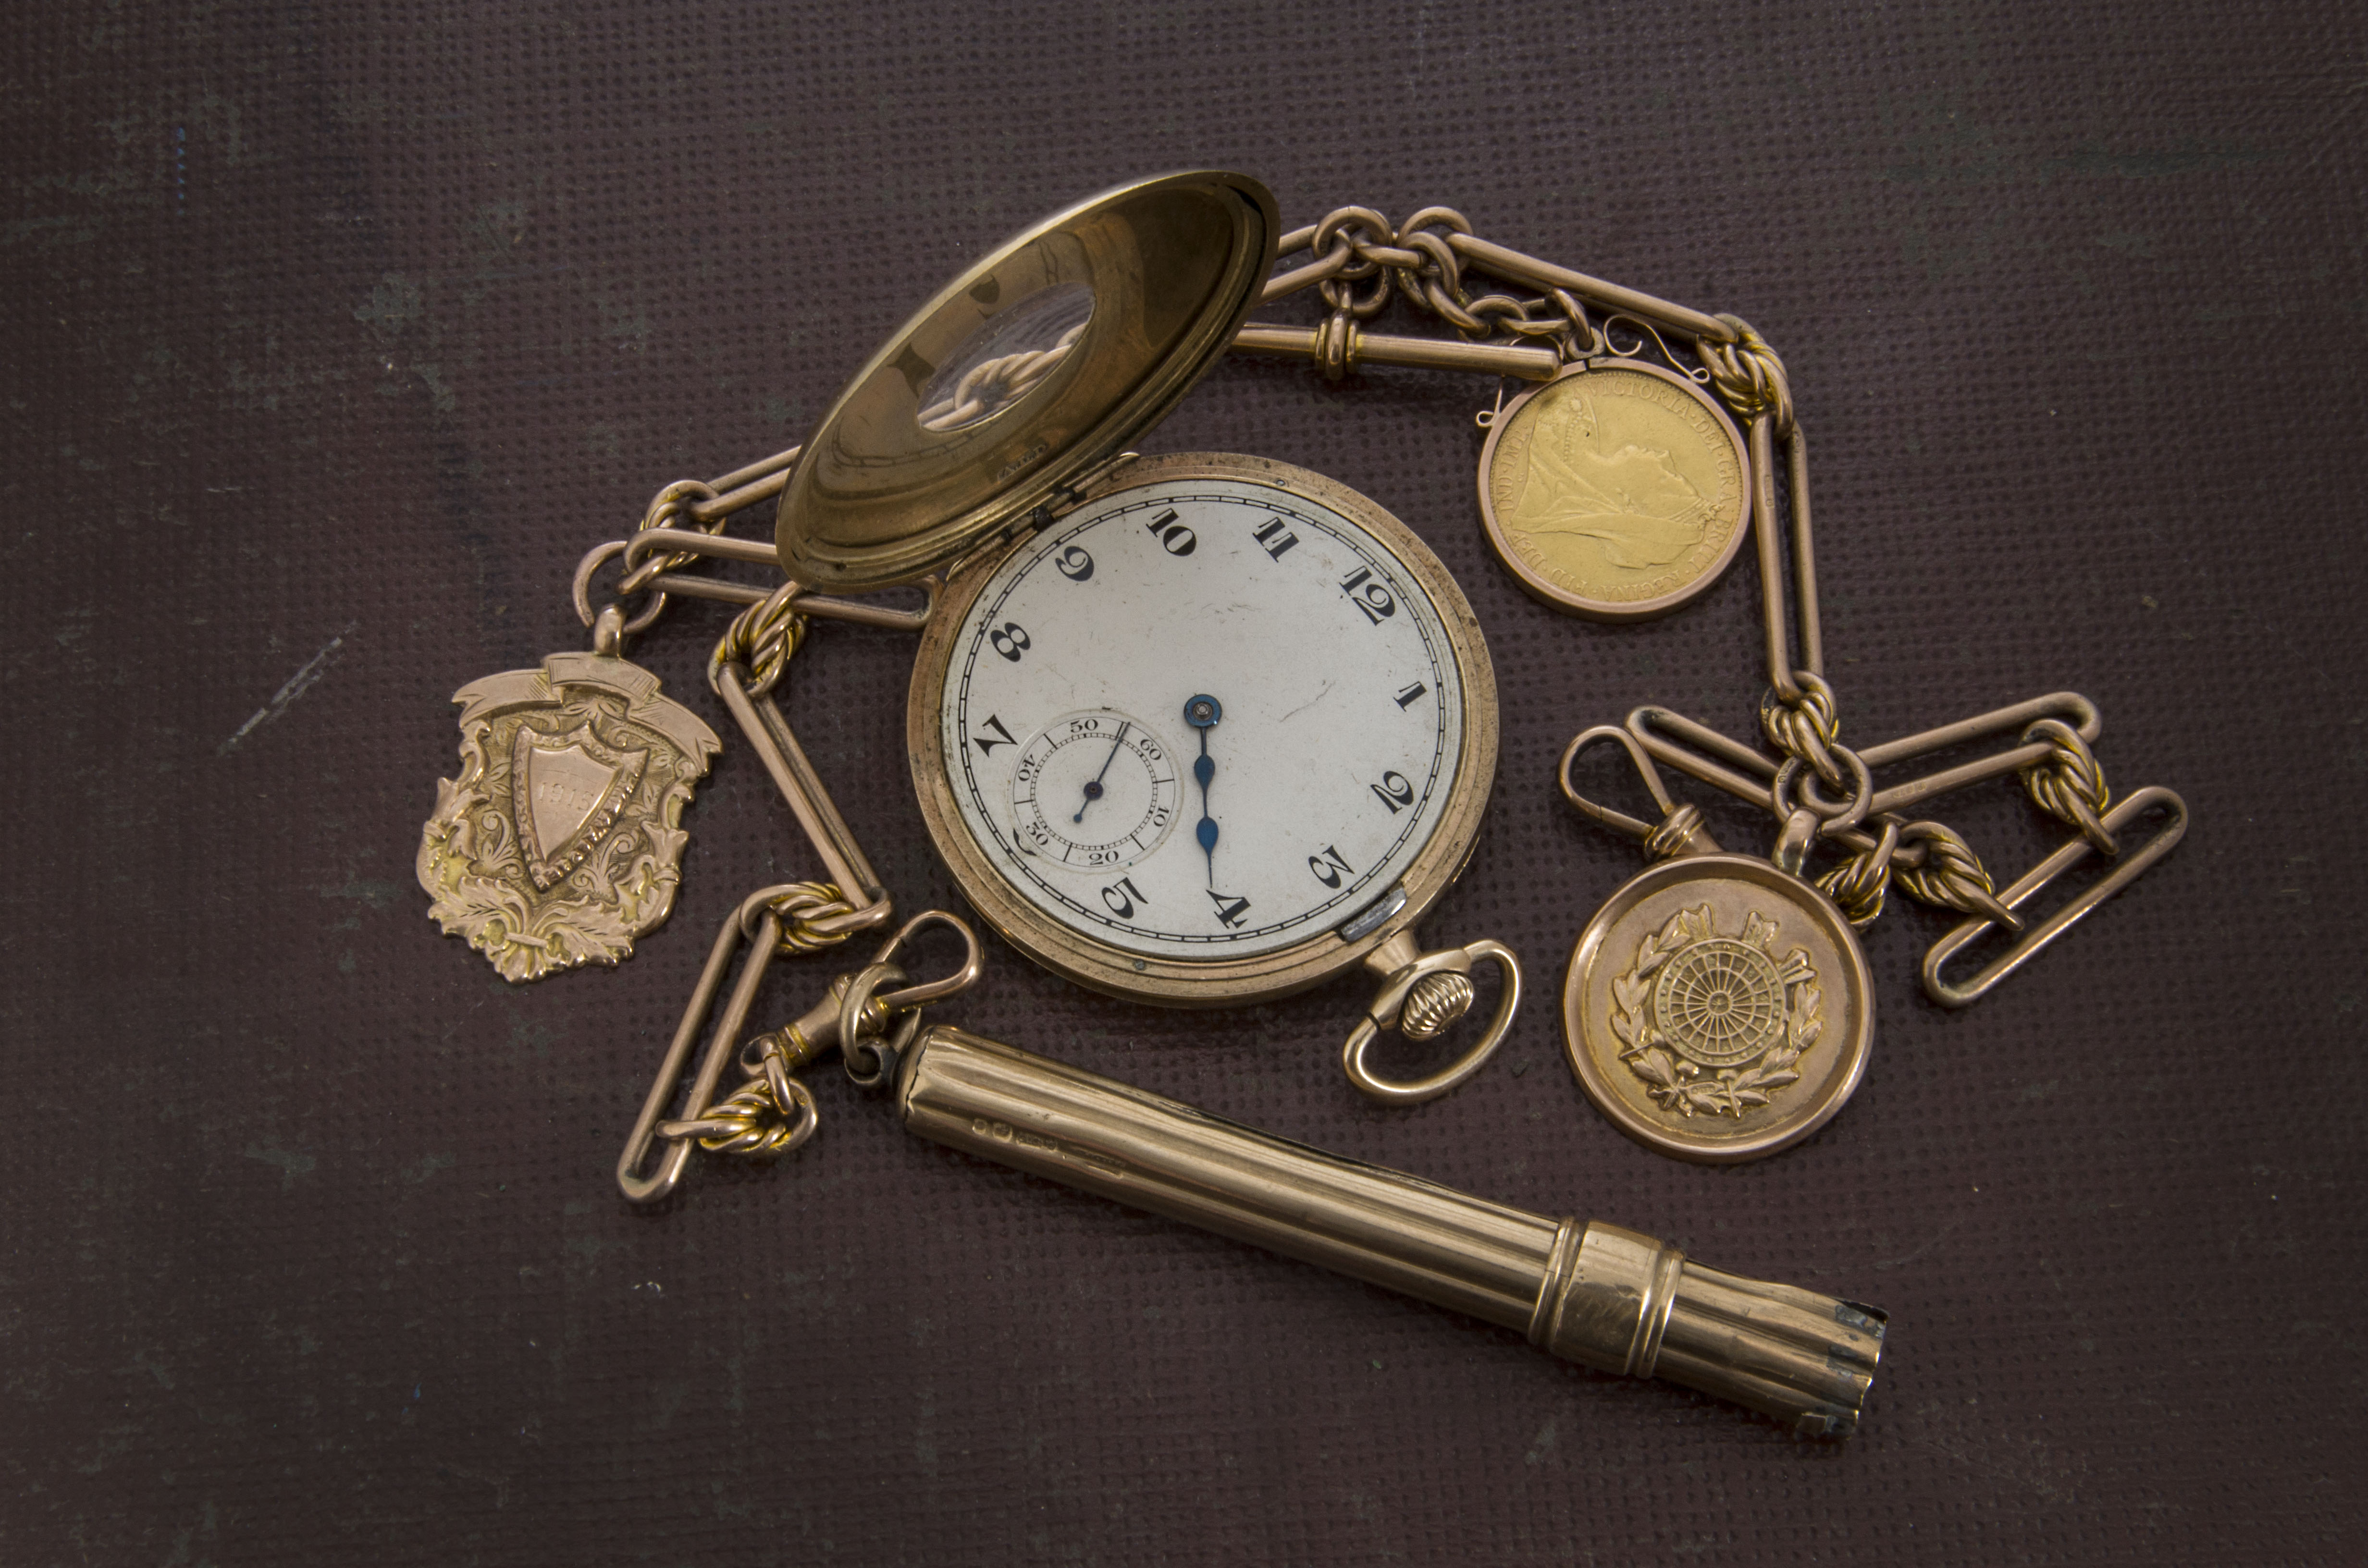 Gold pocket watch and chain with coins